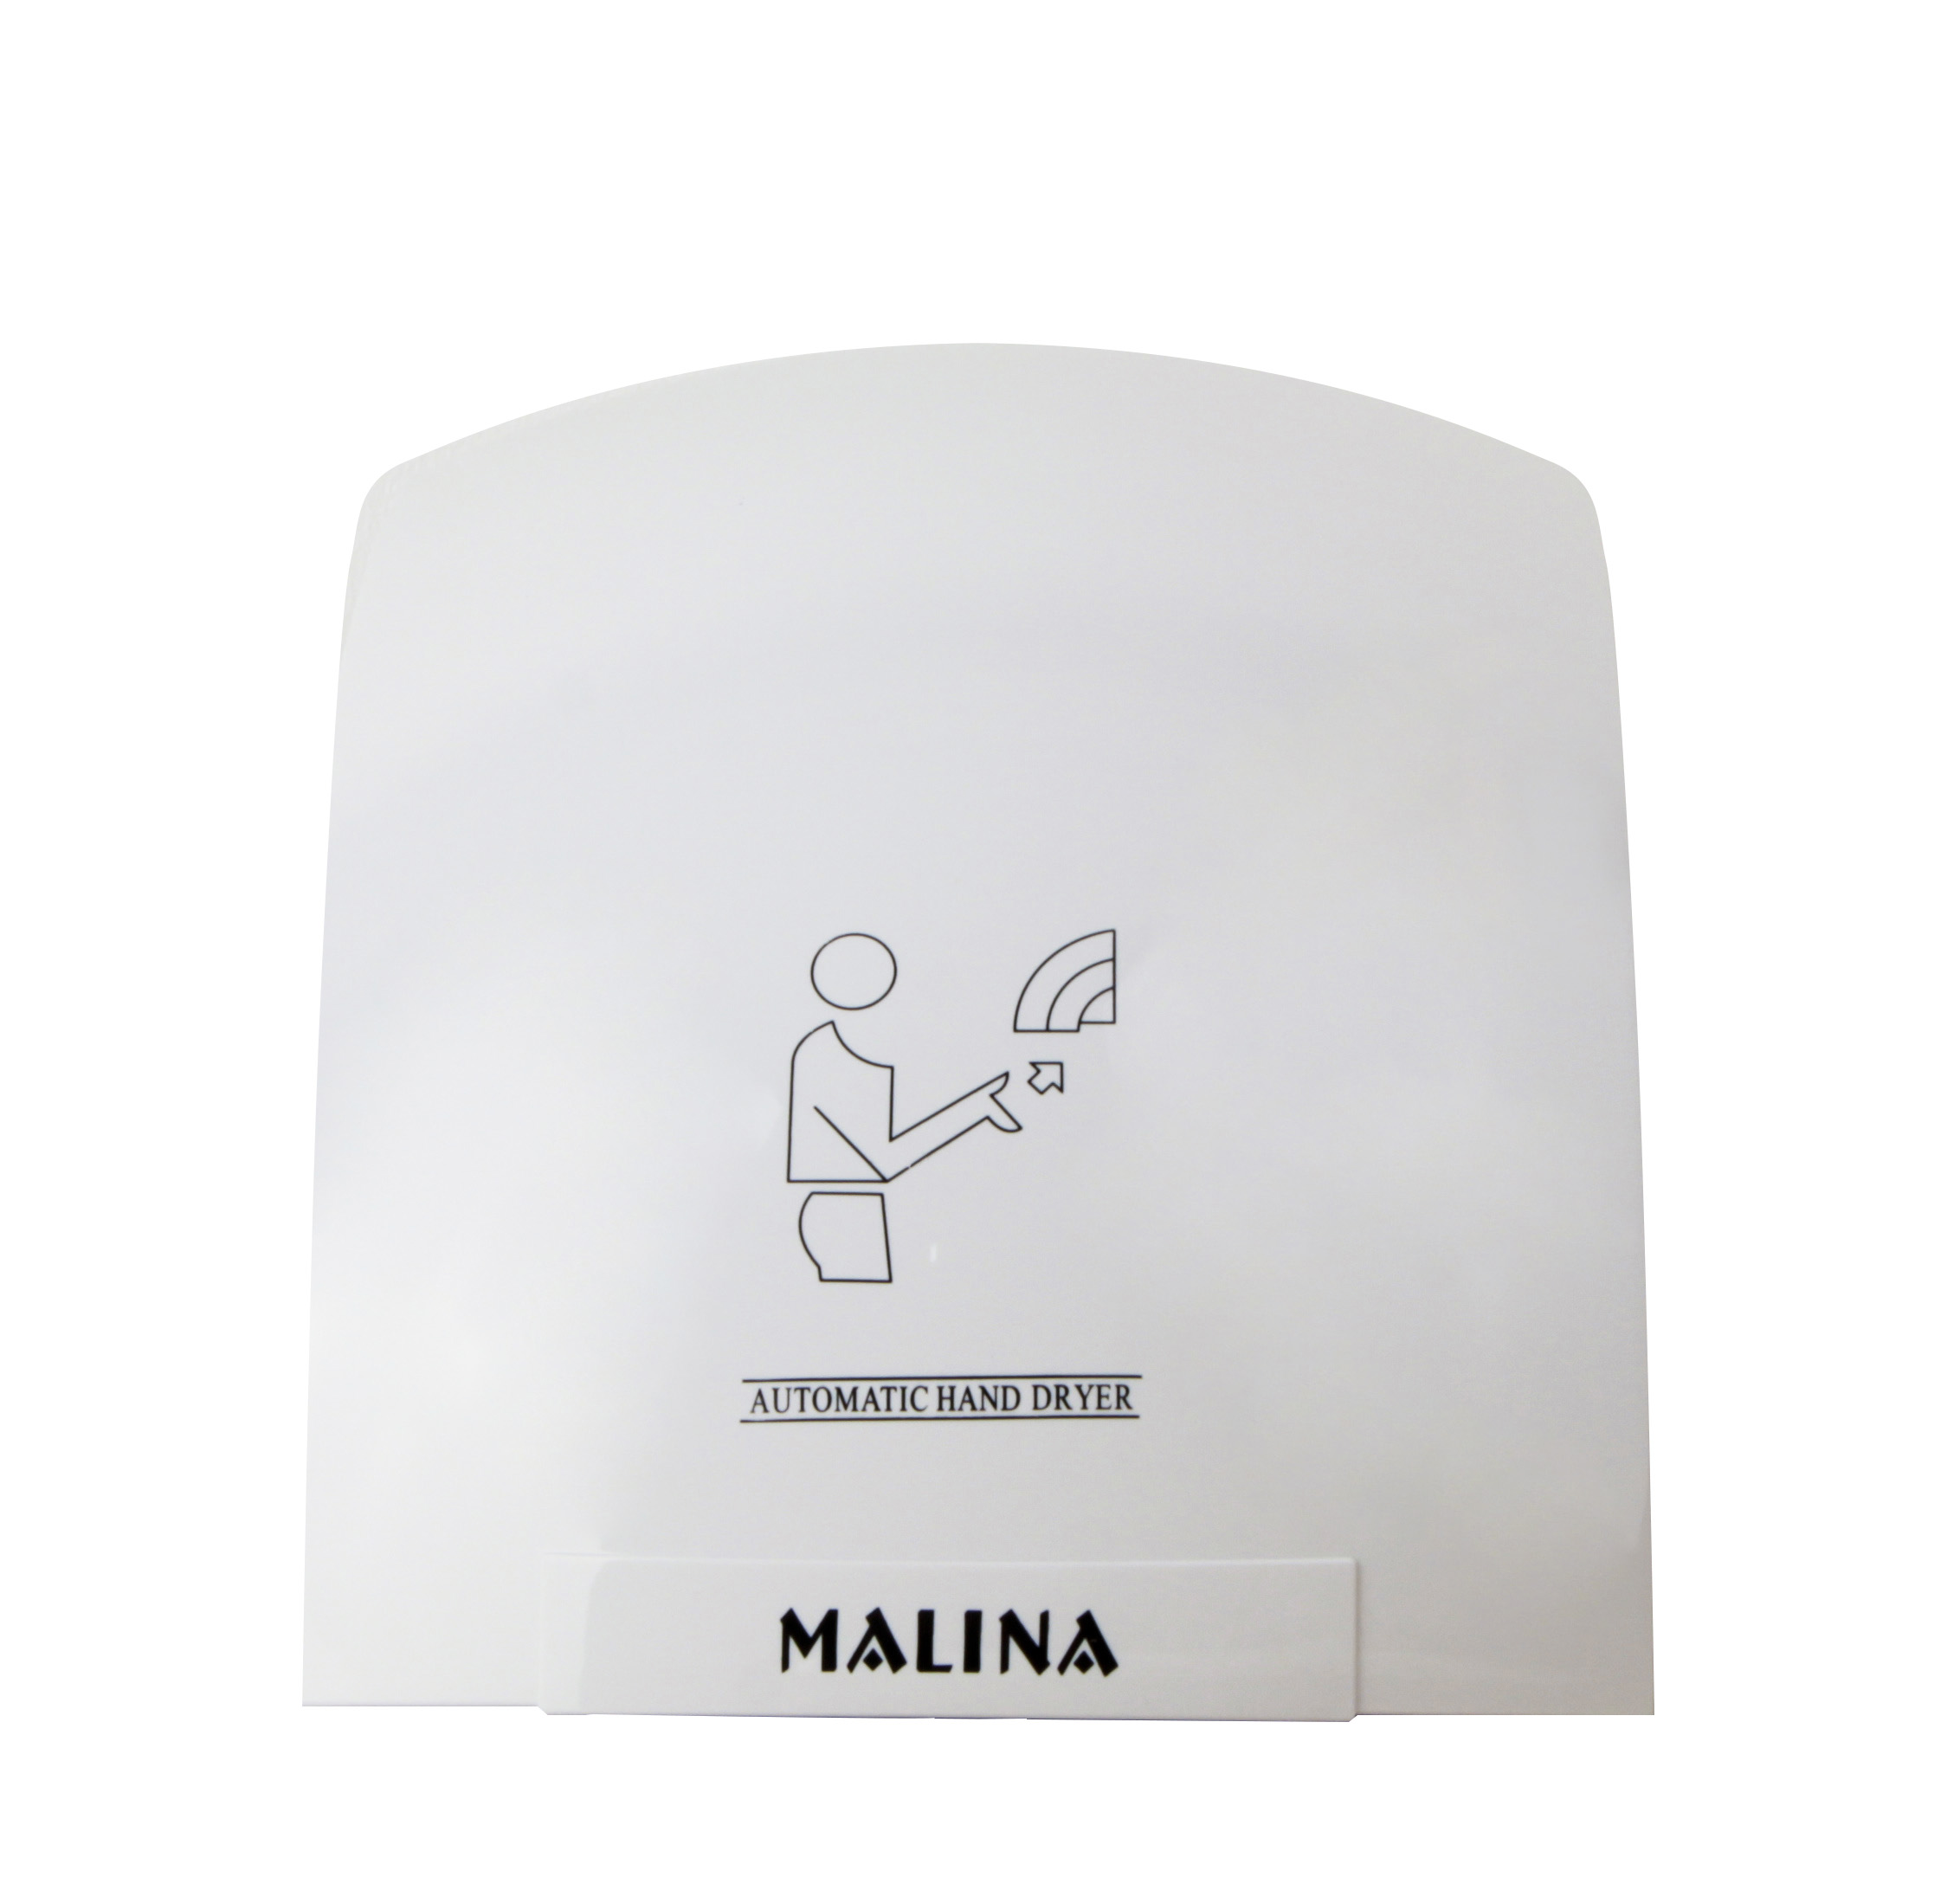 Conventional Hand Dryer Hand Dryer M8021a